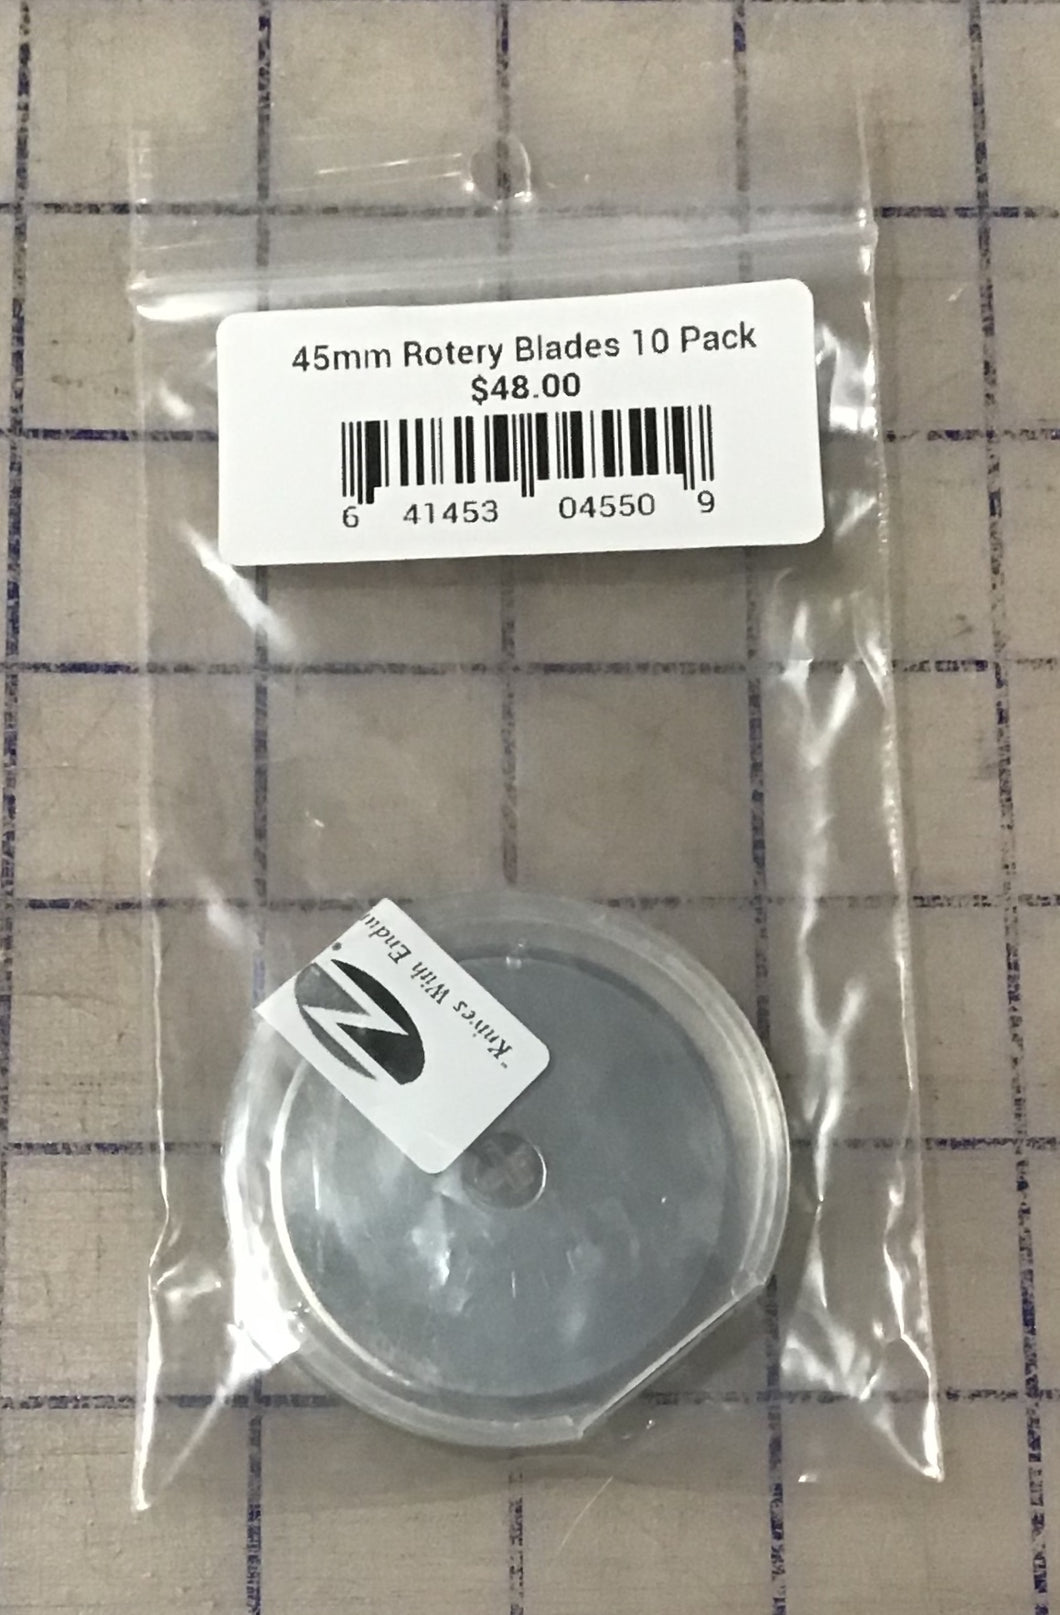 45mm Rotery Blades 10 Pack